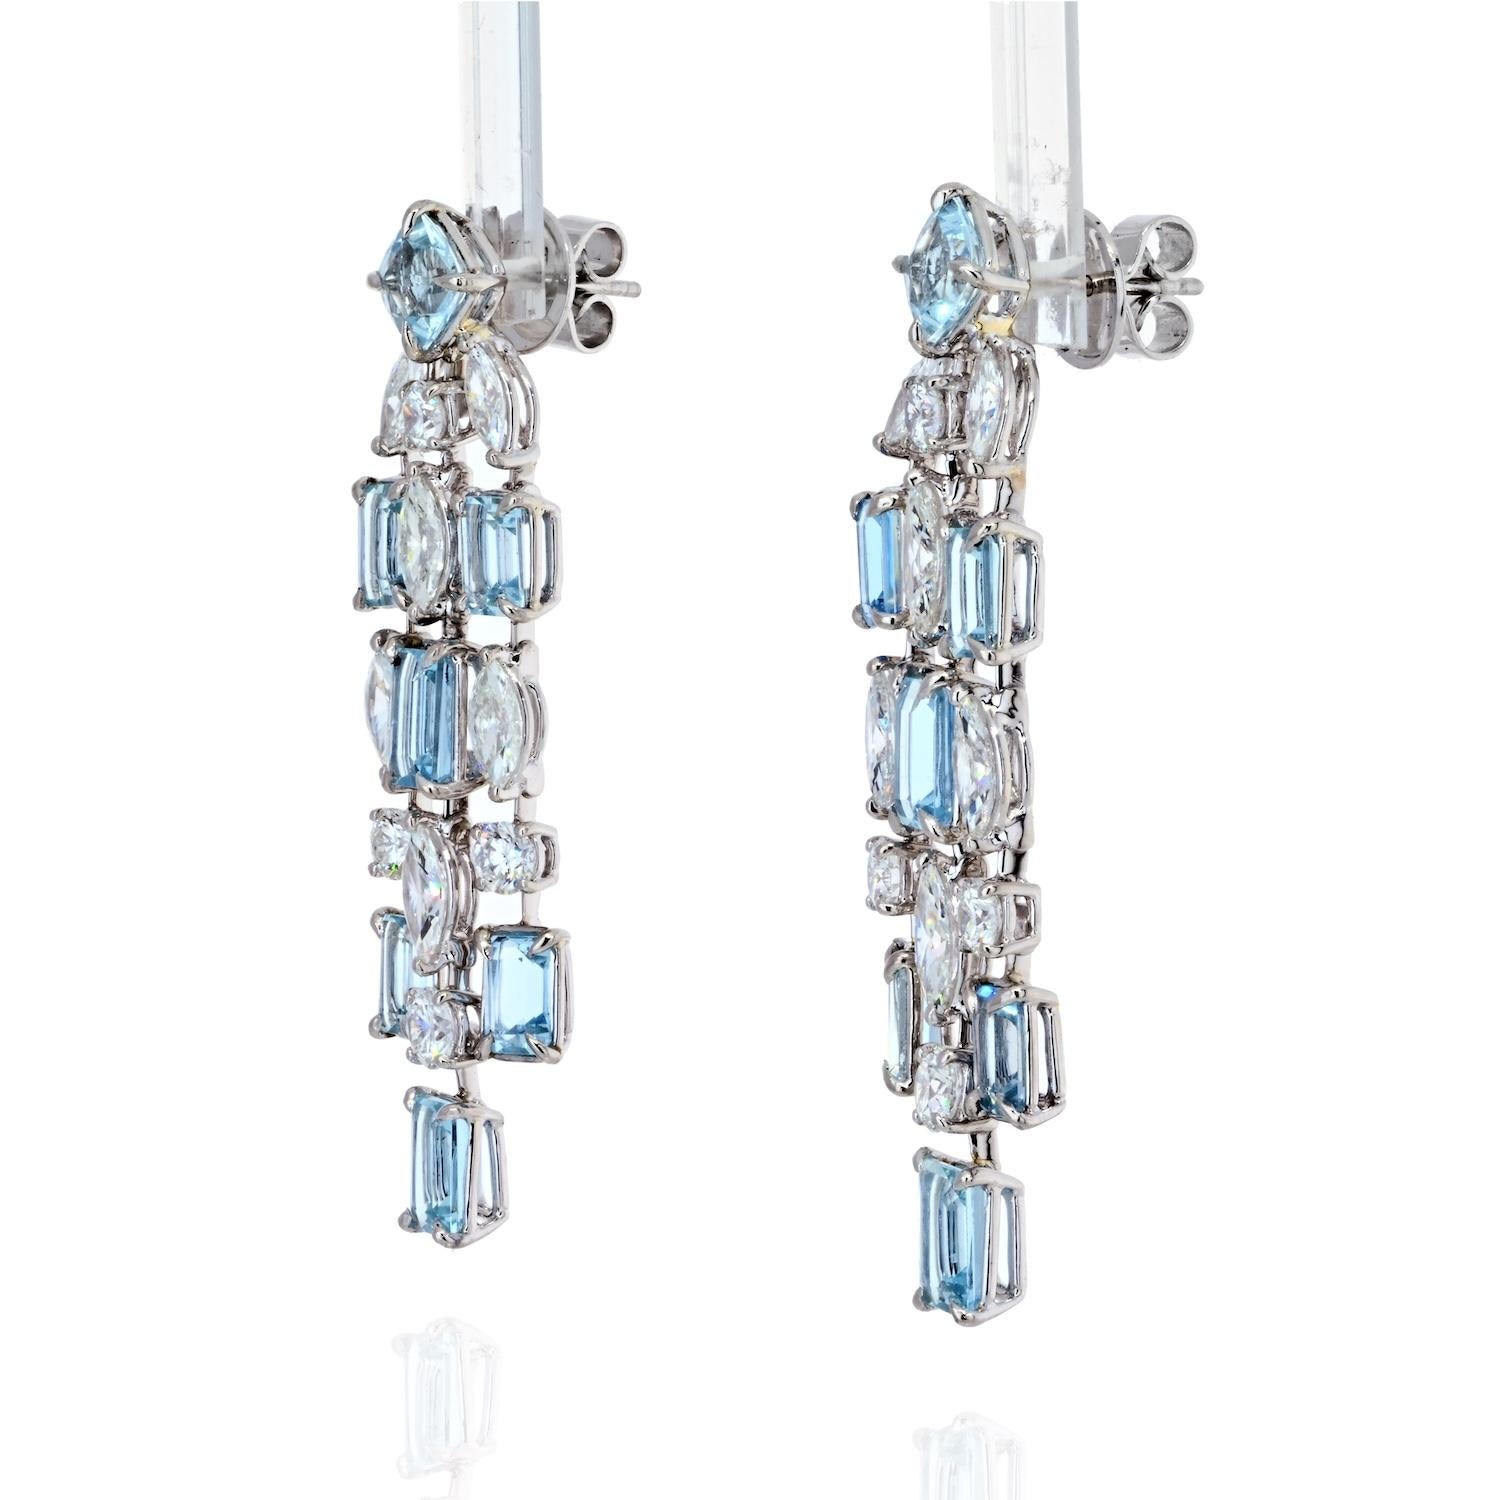 Make a statement with an unforgettable jewelry piece like our triple drop chandelier aquamarine and diamond earrings. Comprising alternating oval shaped aquamarines and brilliant cut diamonds, in platinum. Add a pop of color and glamour to any look.